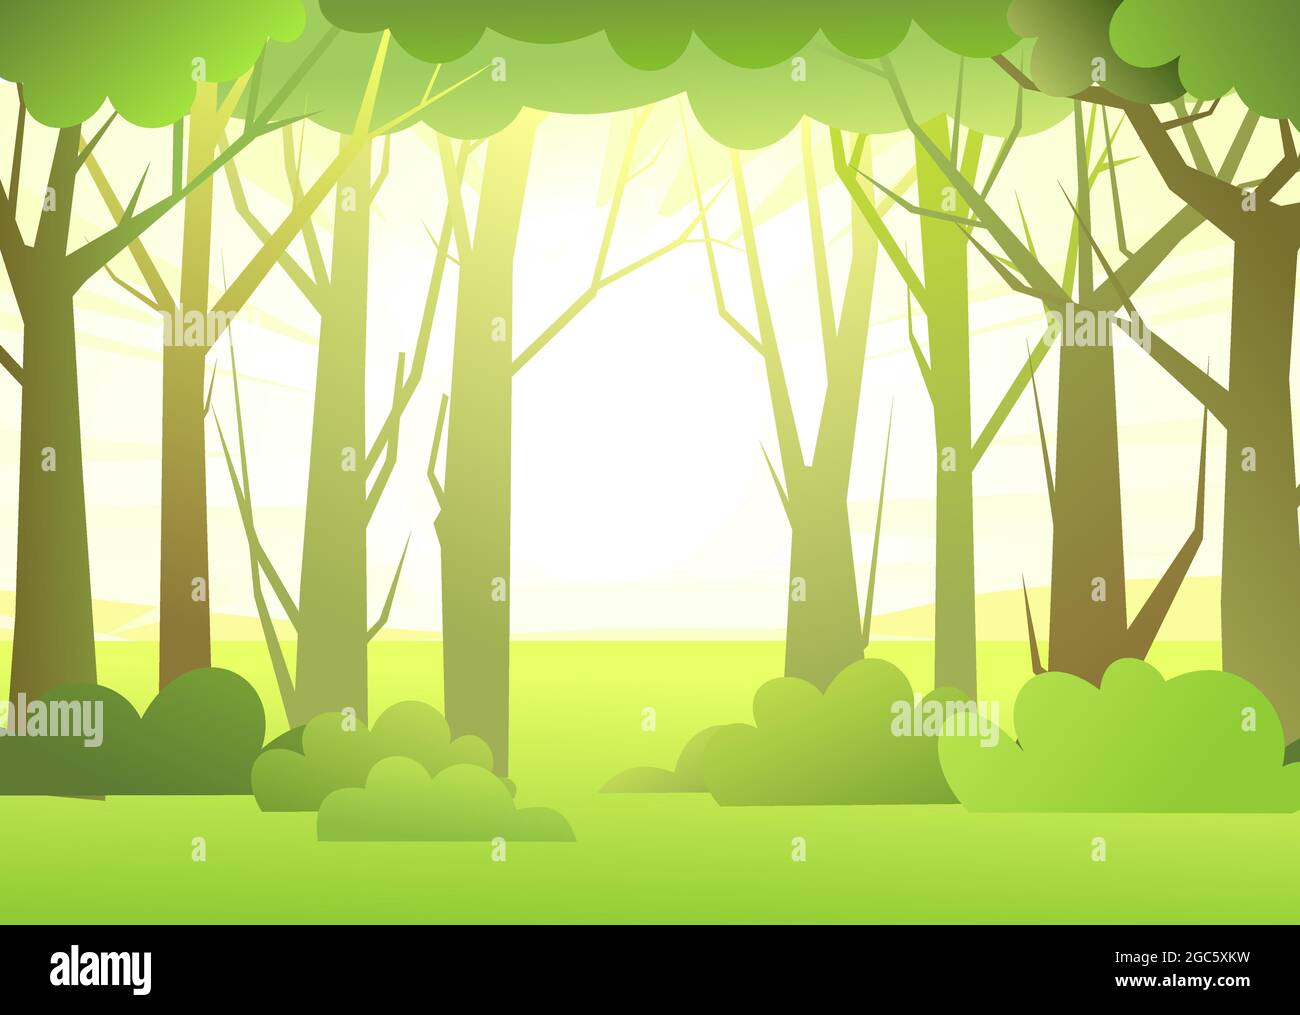 Forest landscape. Dense wild trees with tall, branched trunks. Sunrise. Summer green landscape. Flat design. Cartoon style. Vector Stock Vector